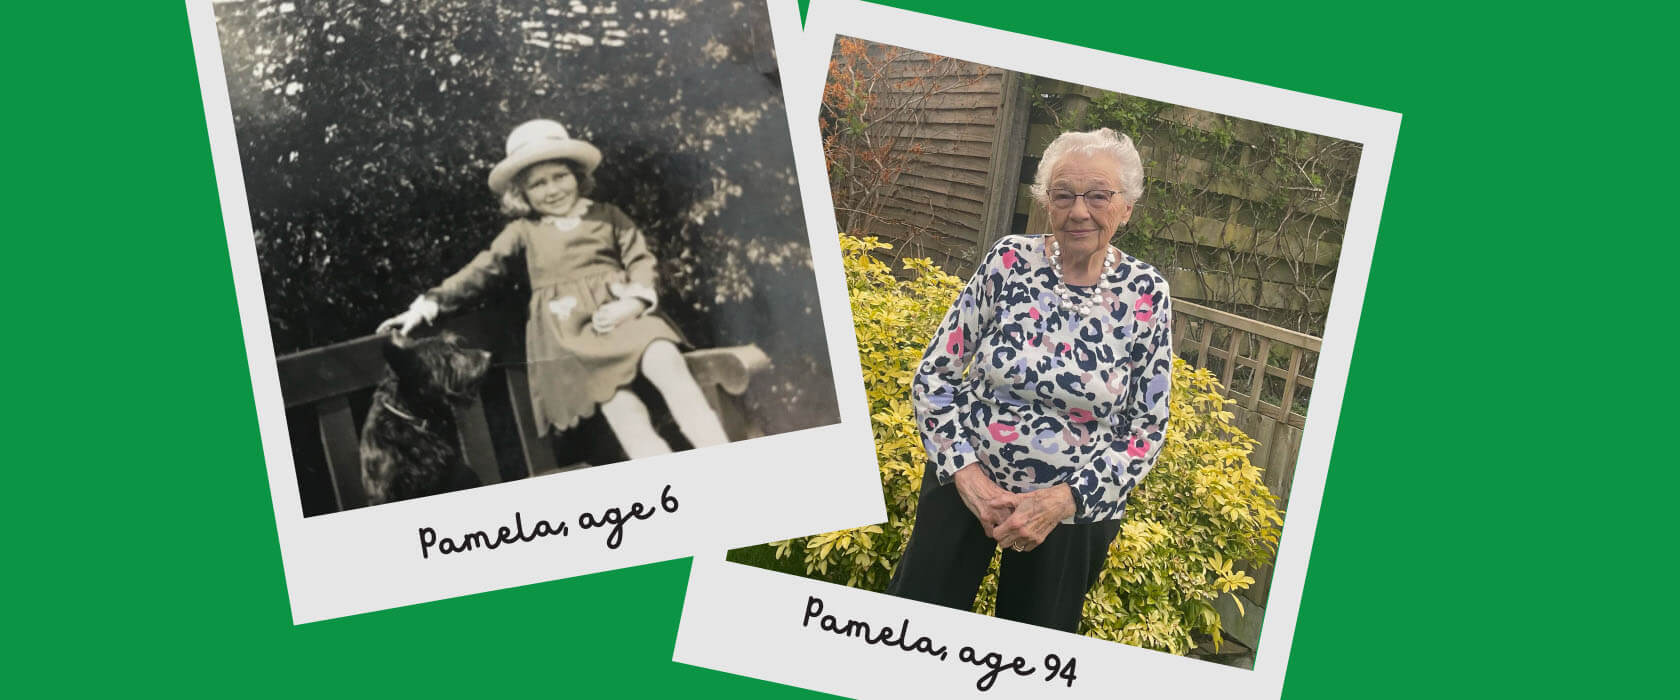 photographs of Pamela Stean aged 6 and 94